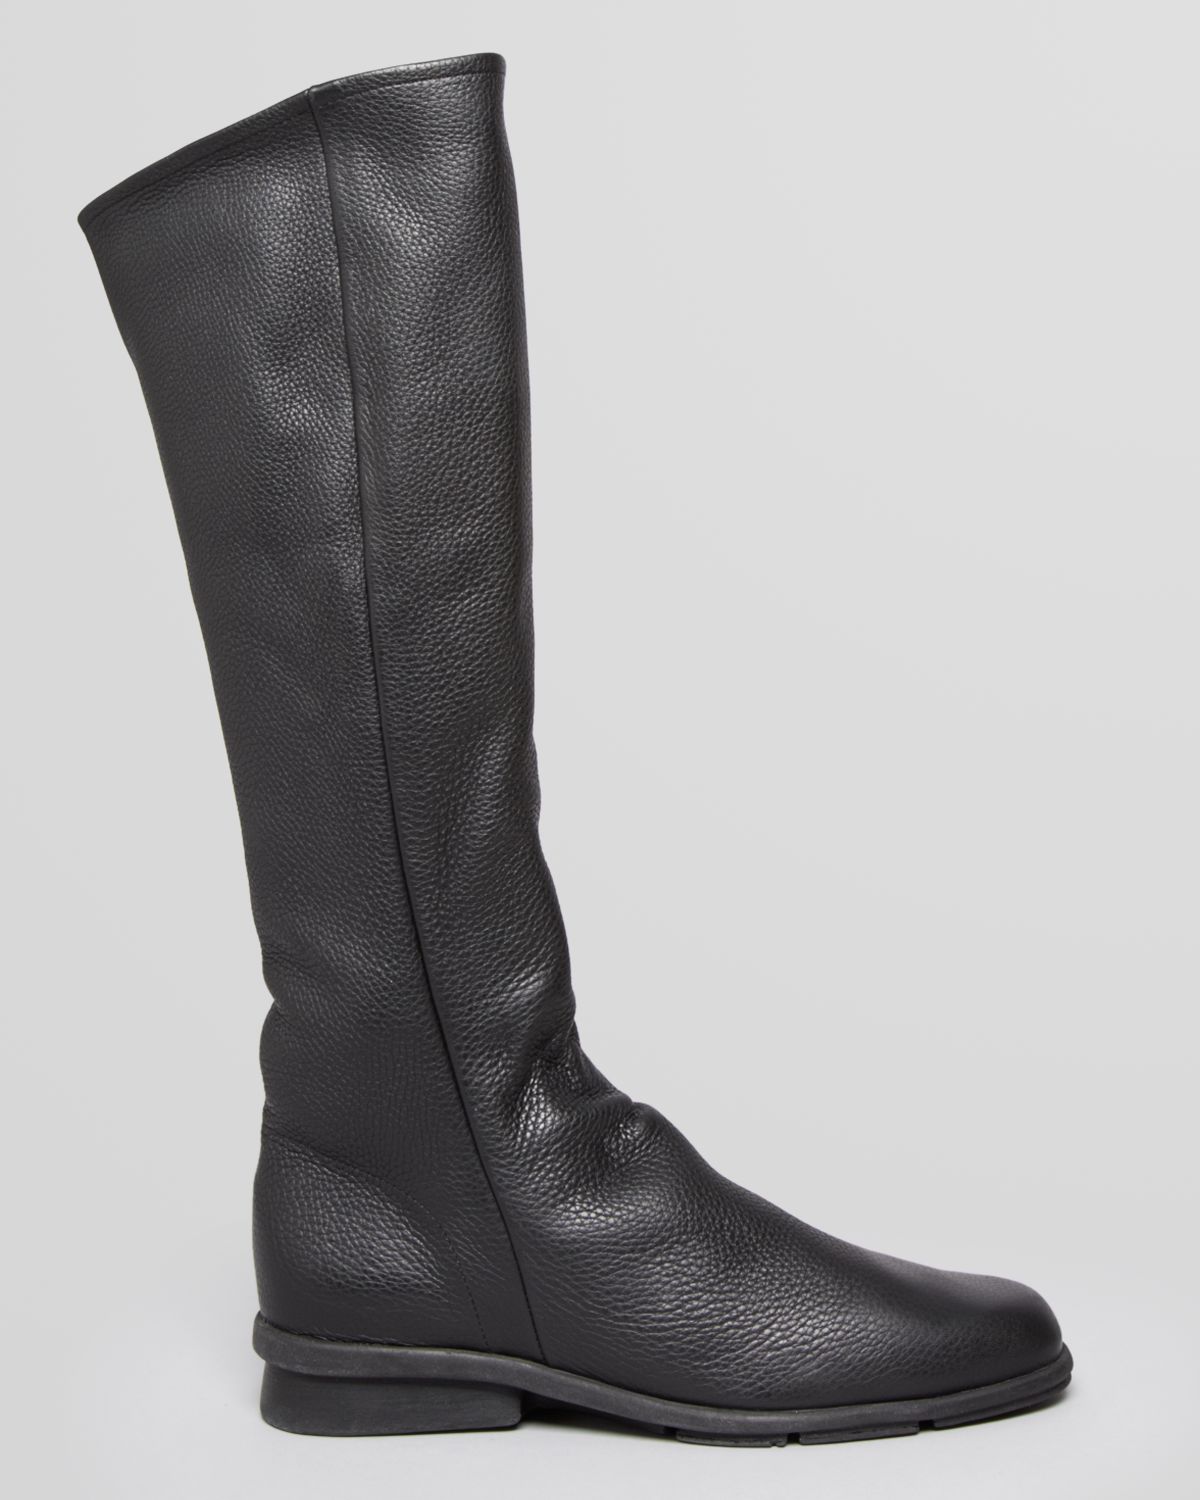 Arche Tall Flat Boots Delith in Black - Lyst